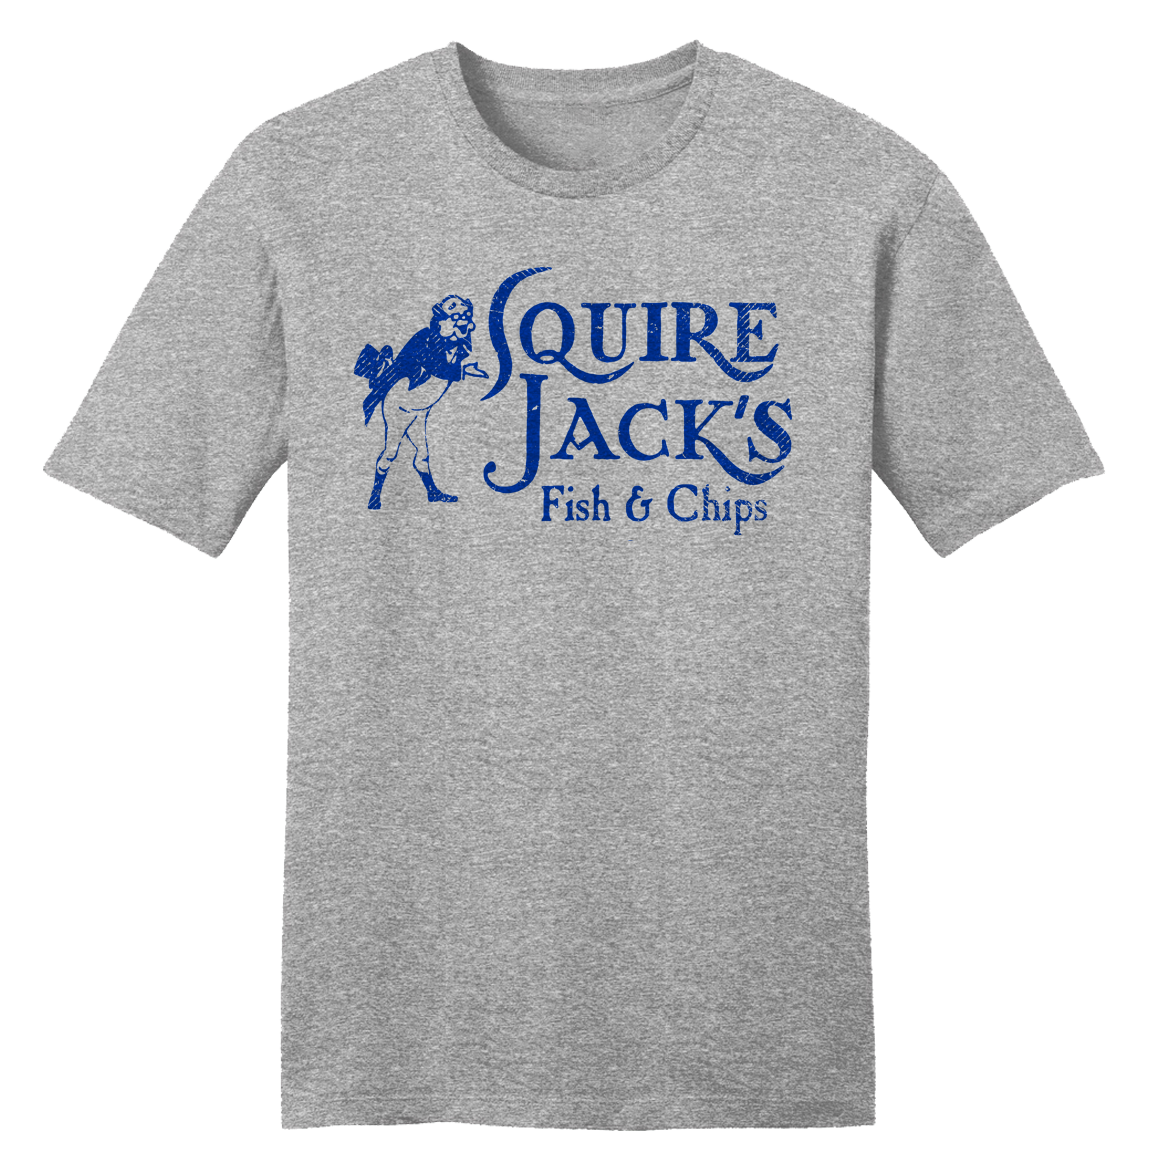 Squire Jack's Fish & Chips tee